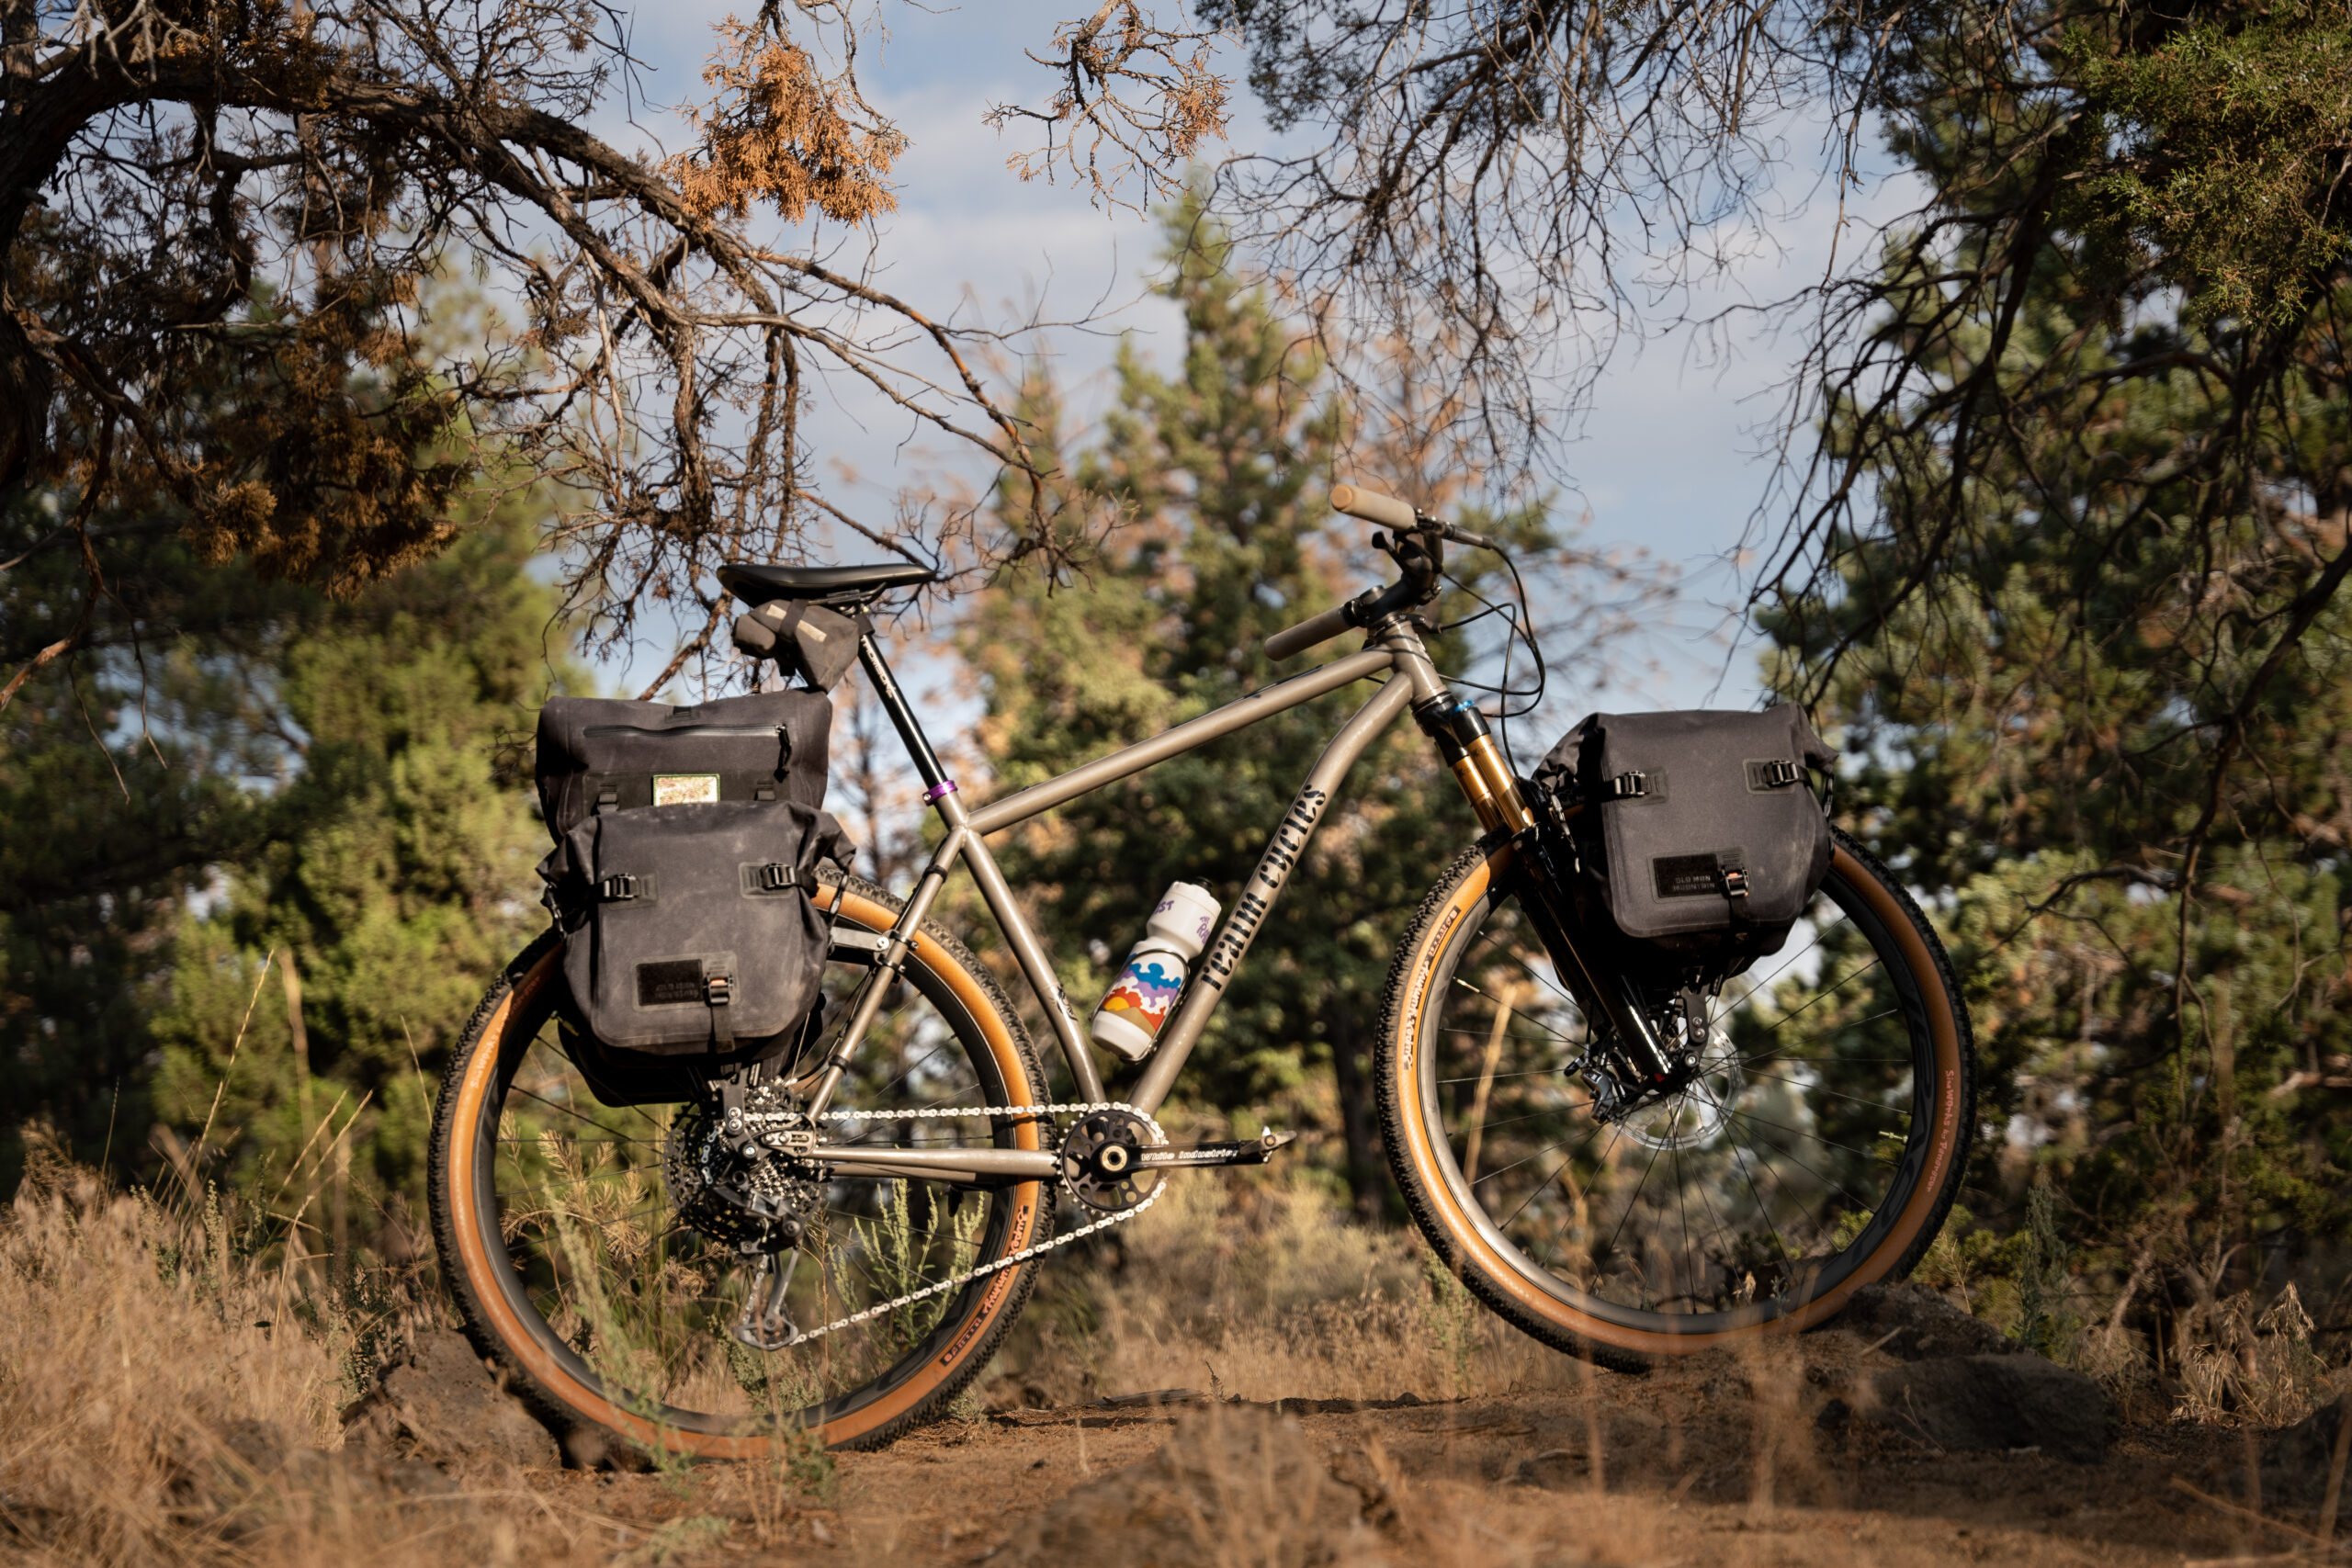 Realm Cycles hardtail mountain bike with a front and rear bike rack. On the front rack is a Juniper Trunk bag, and on the rear rack is a pair of Ponderosa Panniers.